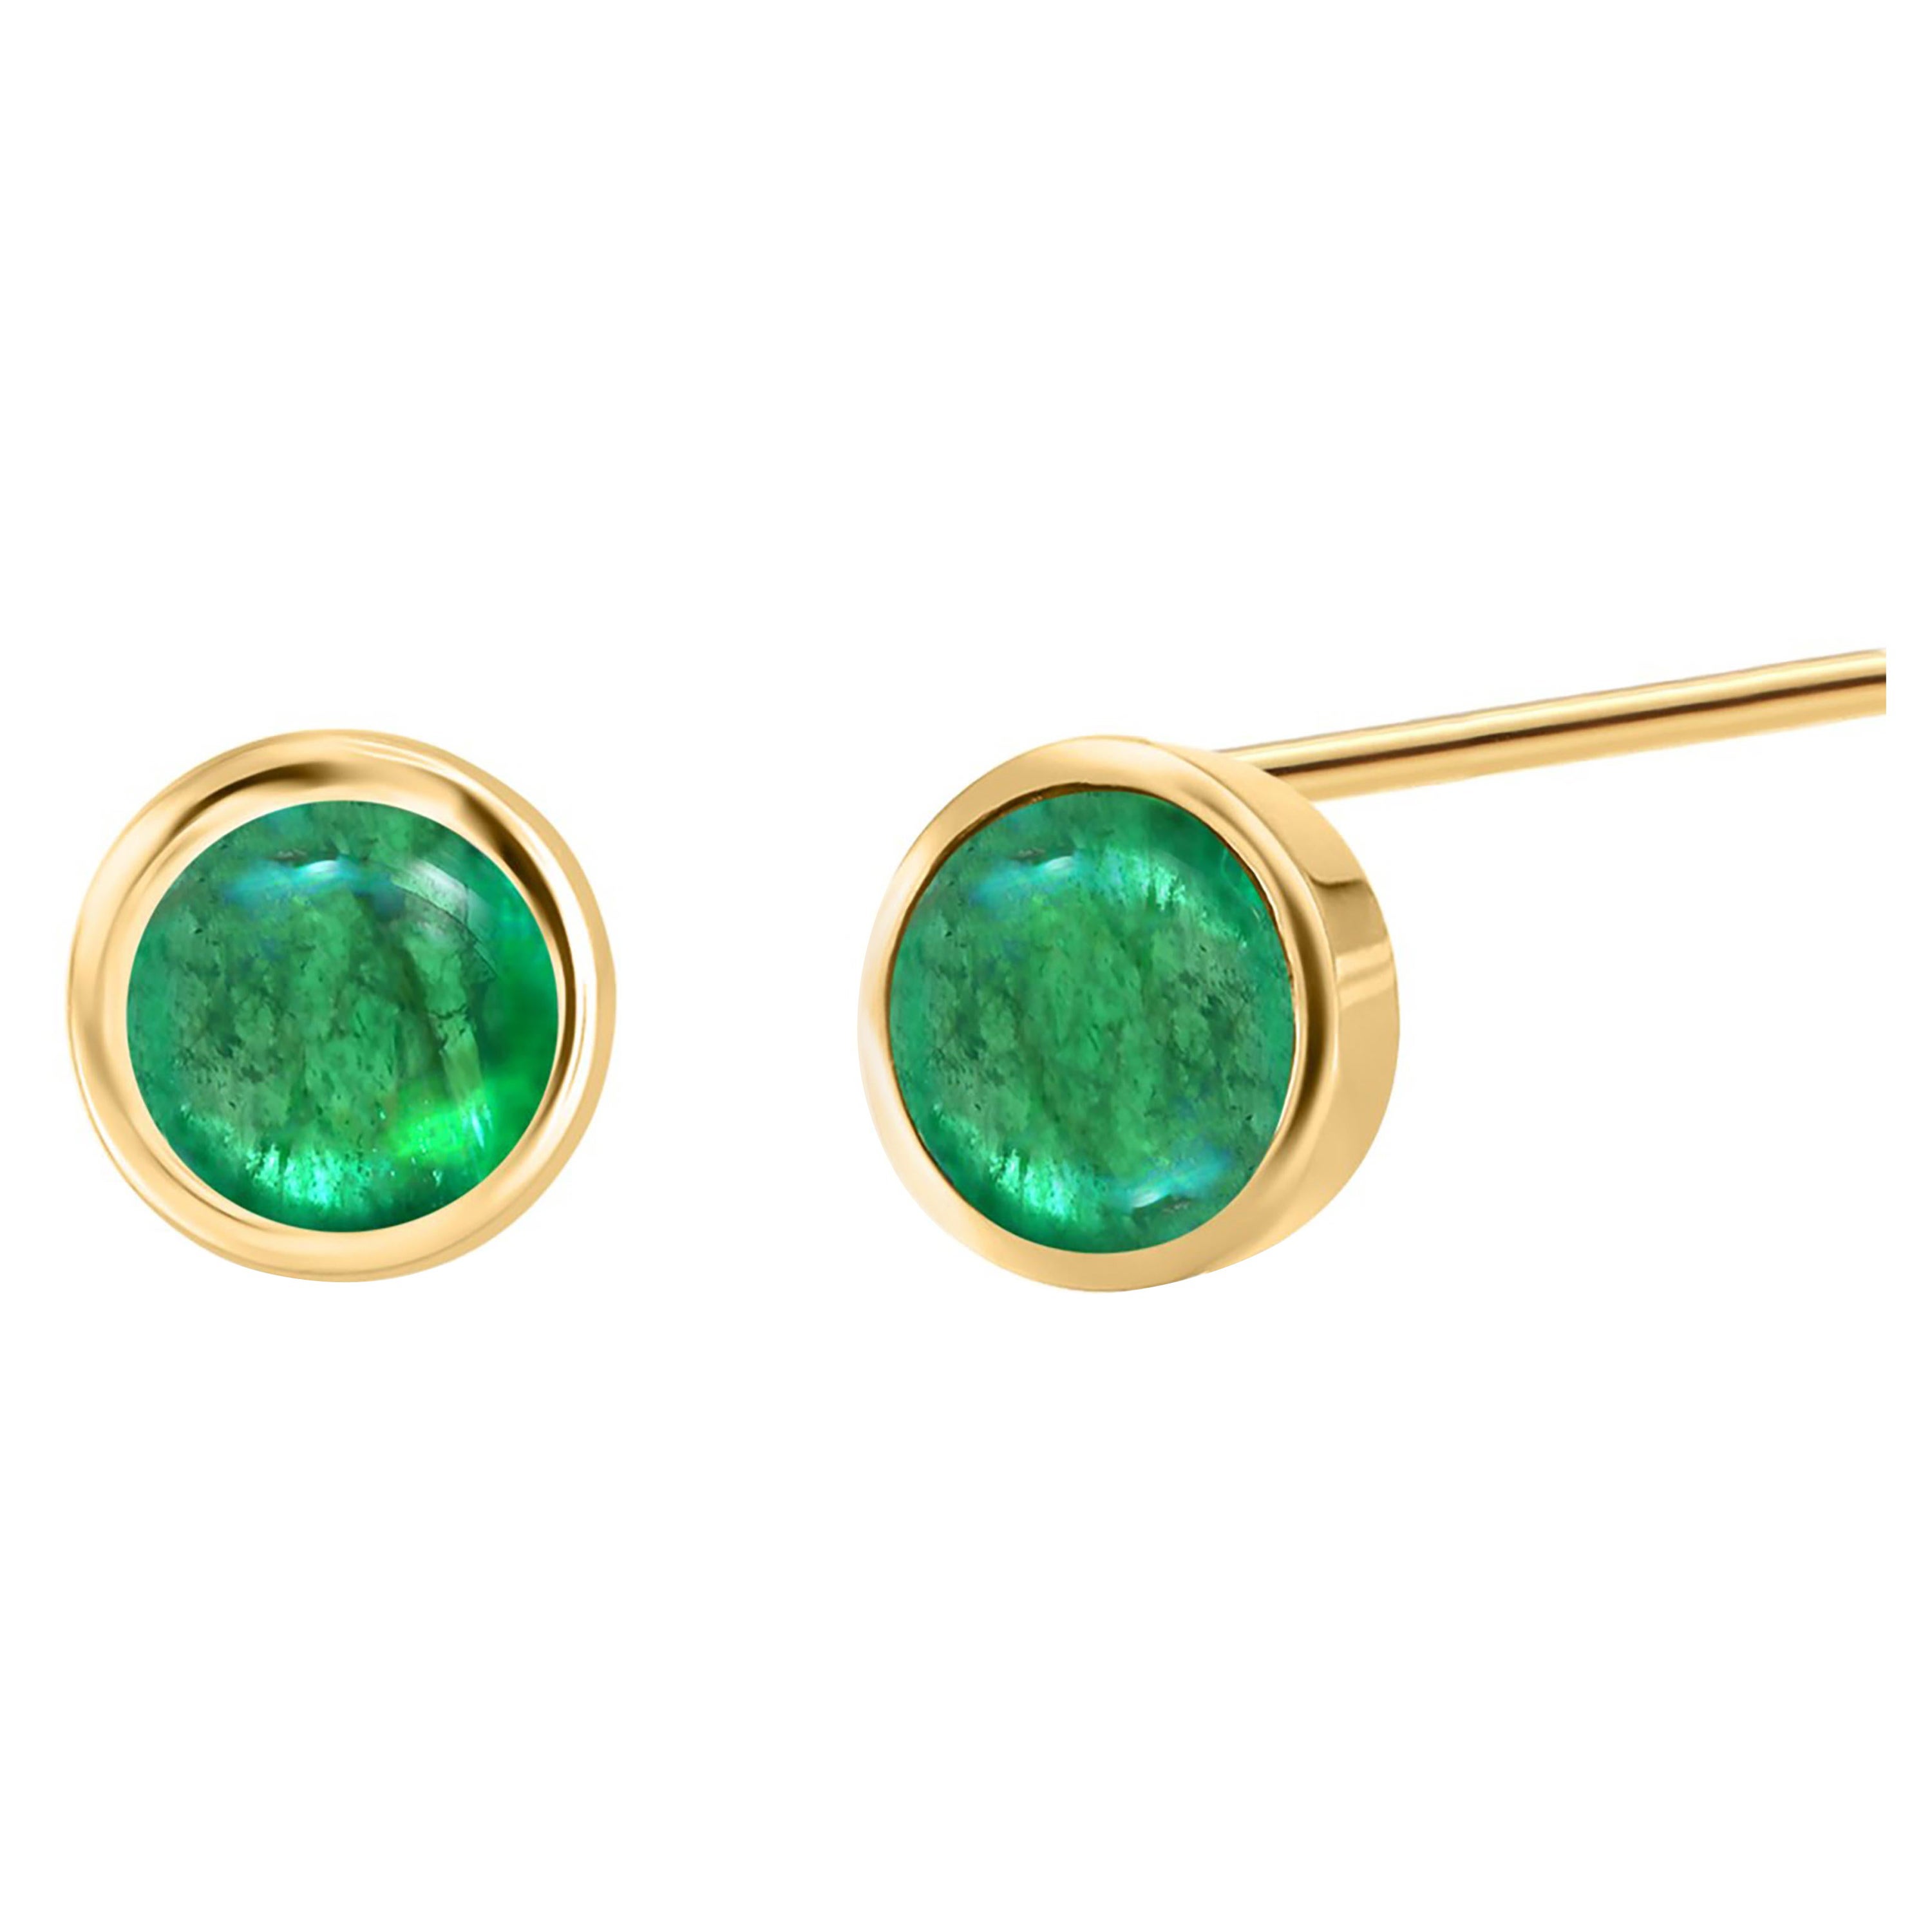 Matched Cabochon Emerald 1.10 Carat Bezel Set Yellow Gold 0.25 Inch Earrings For Sale